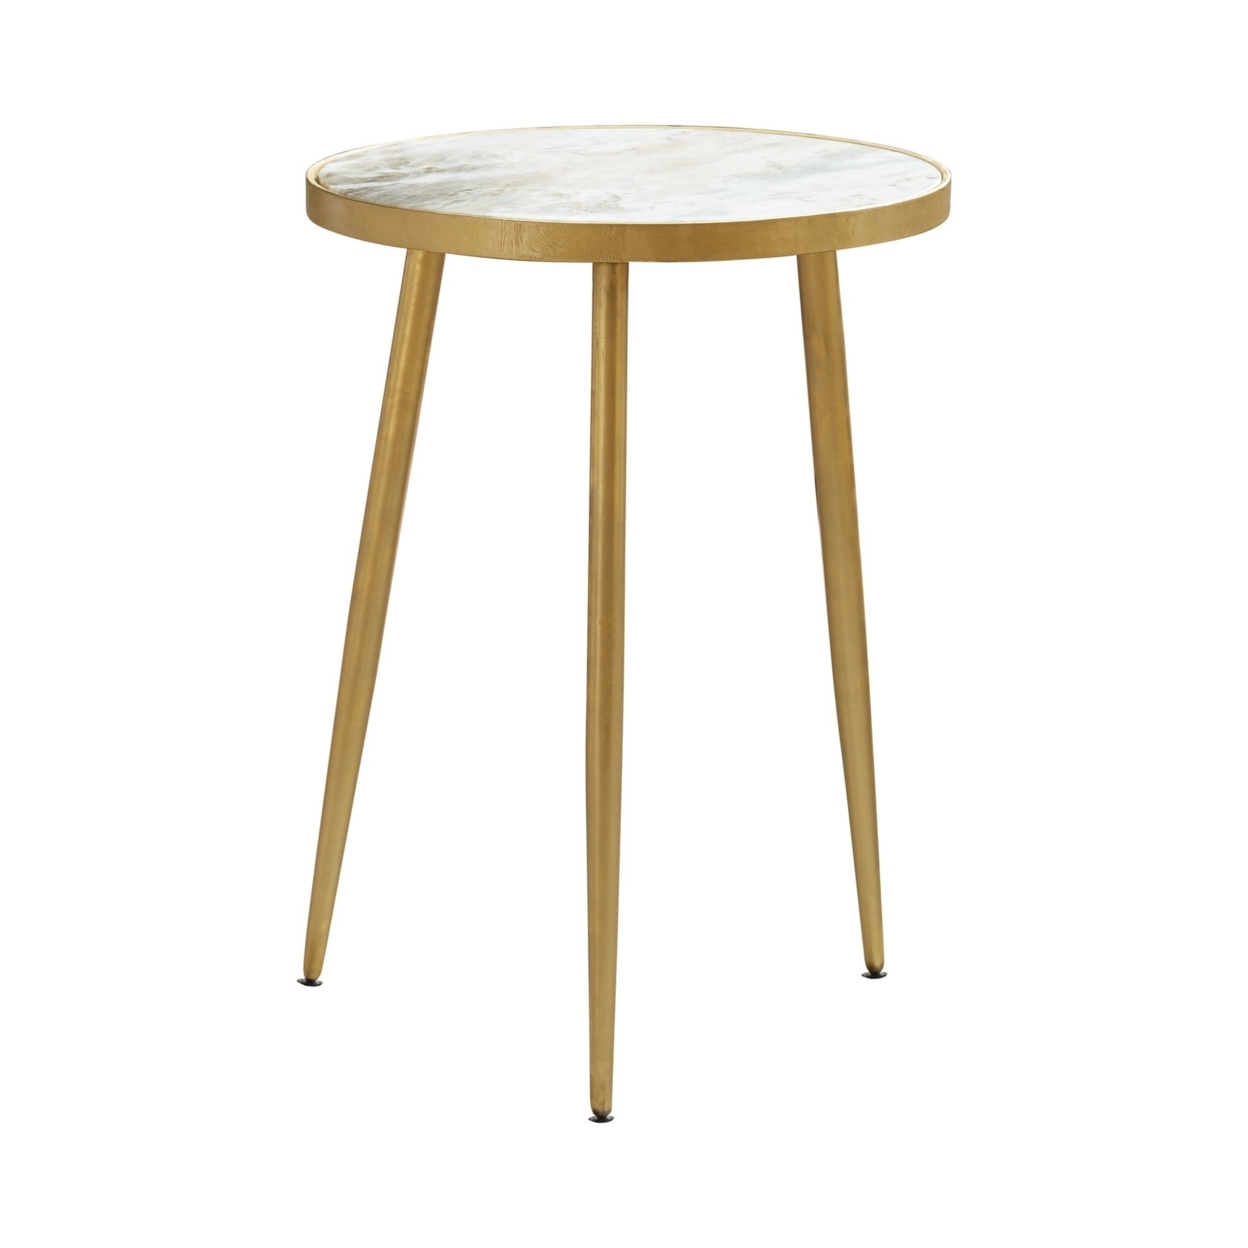 22 Inch Modern Accent Table, Round Marble Top, White, Gold